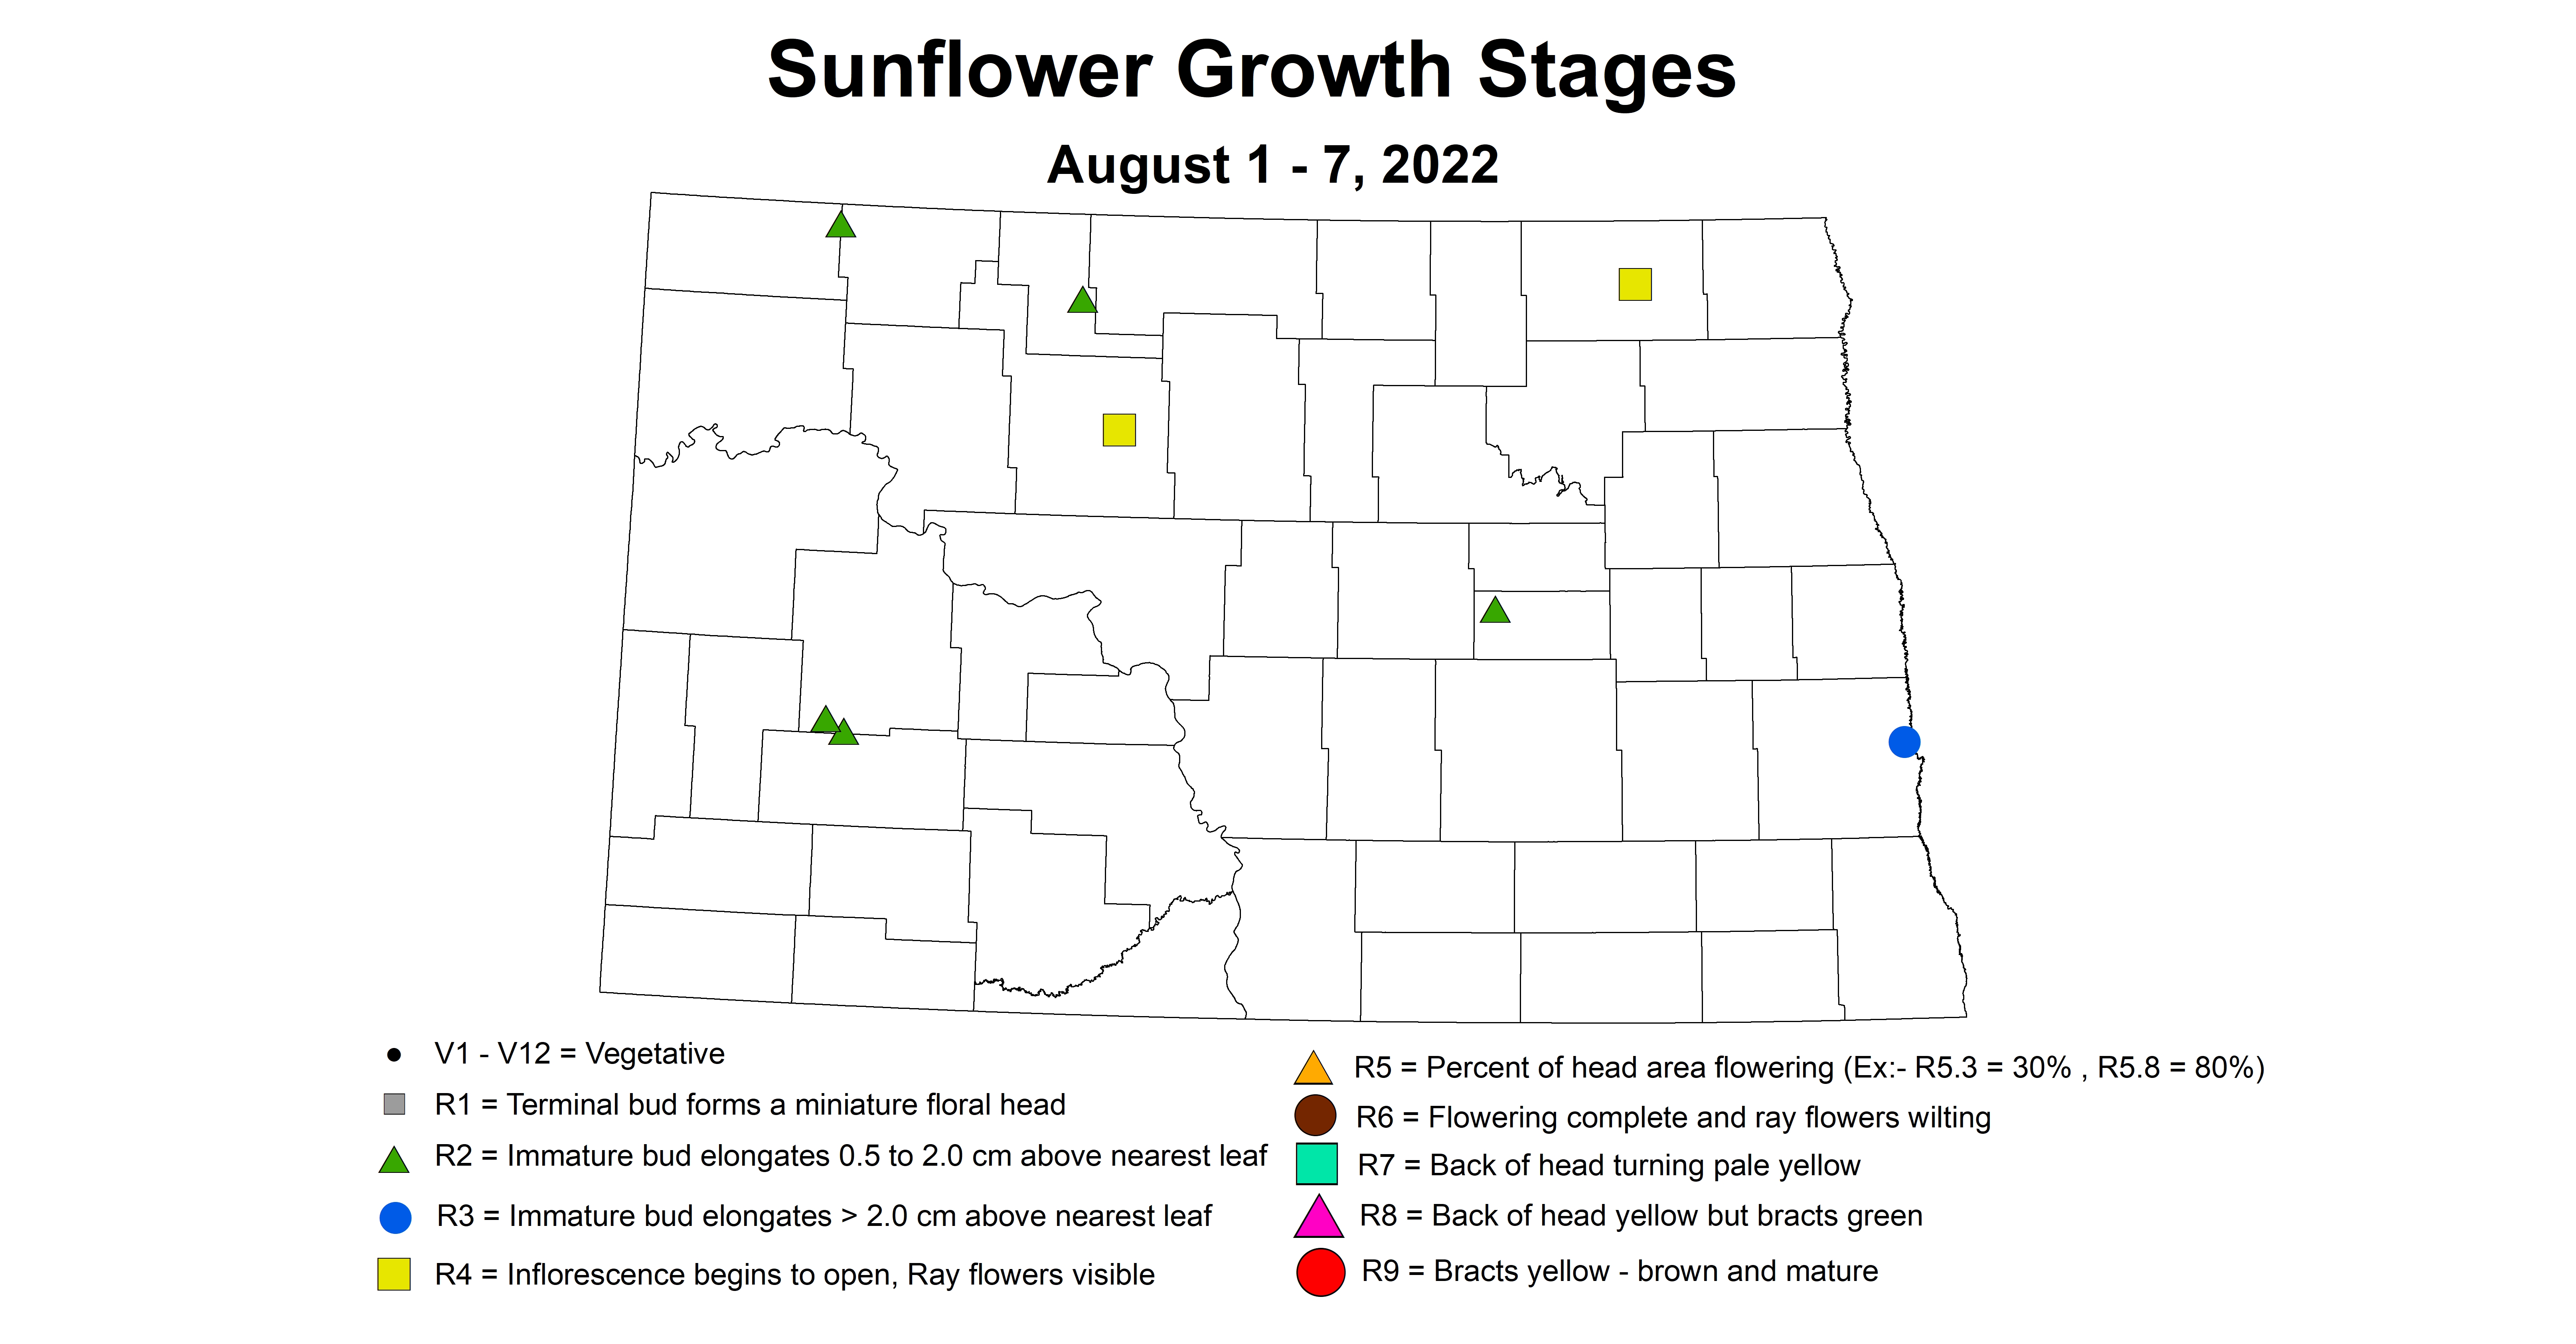 sunflower insecttrap growth stages 2022 8.1-8.7